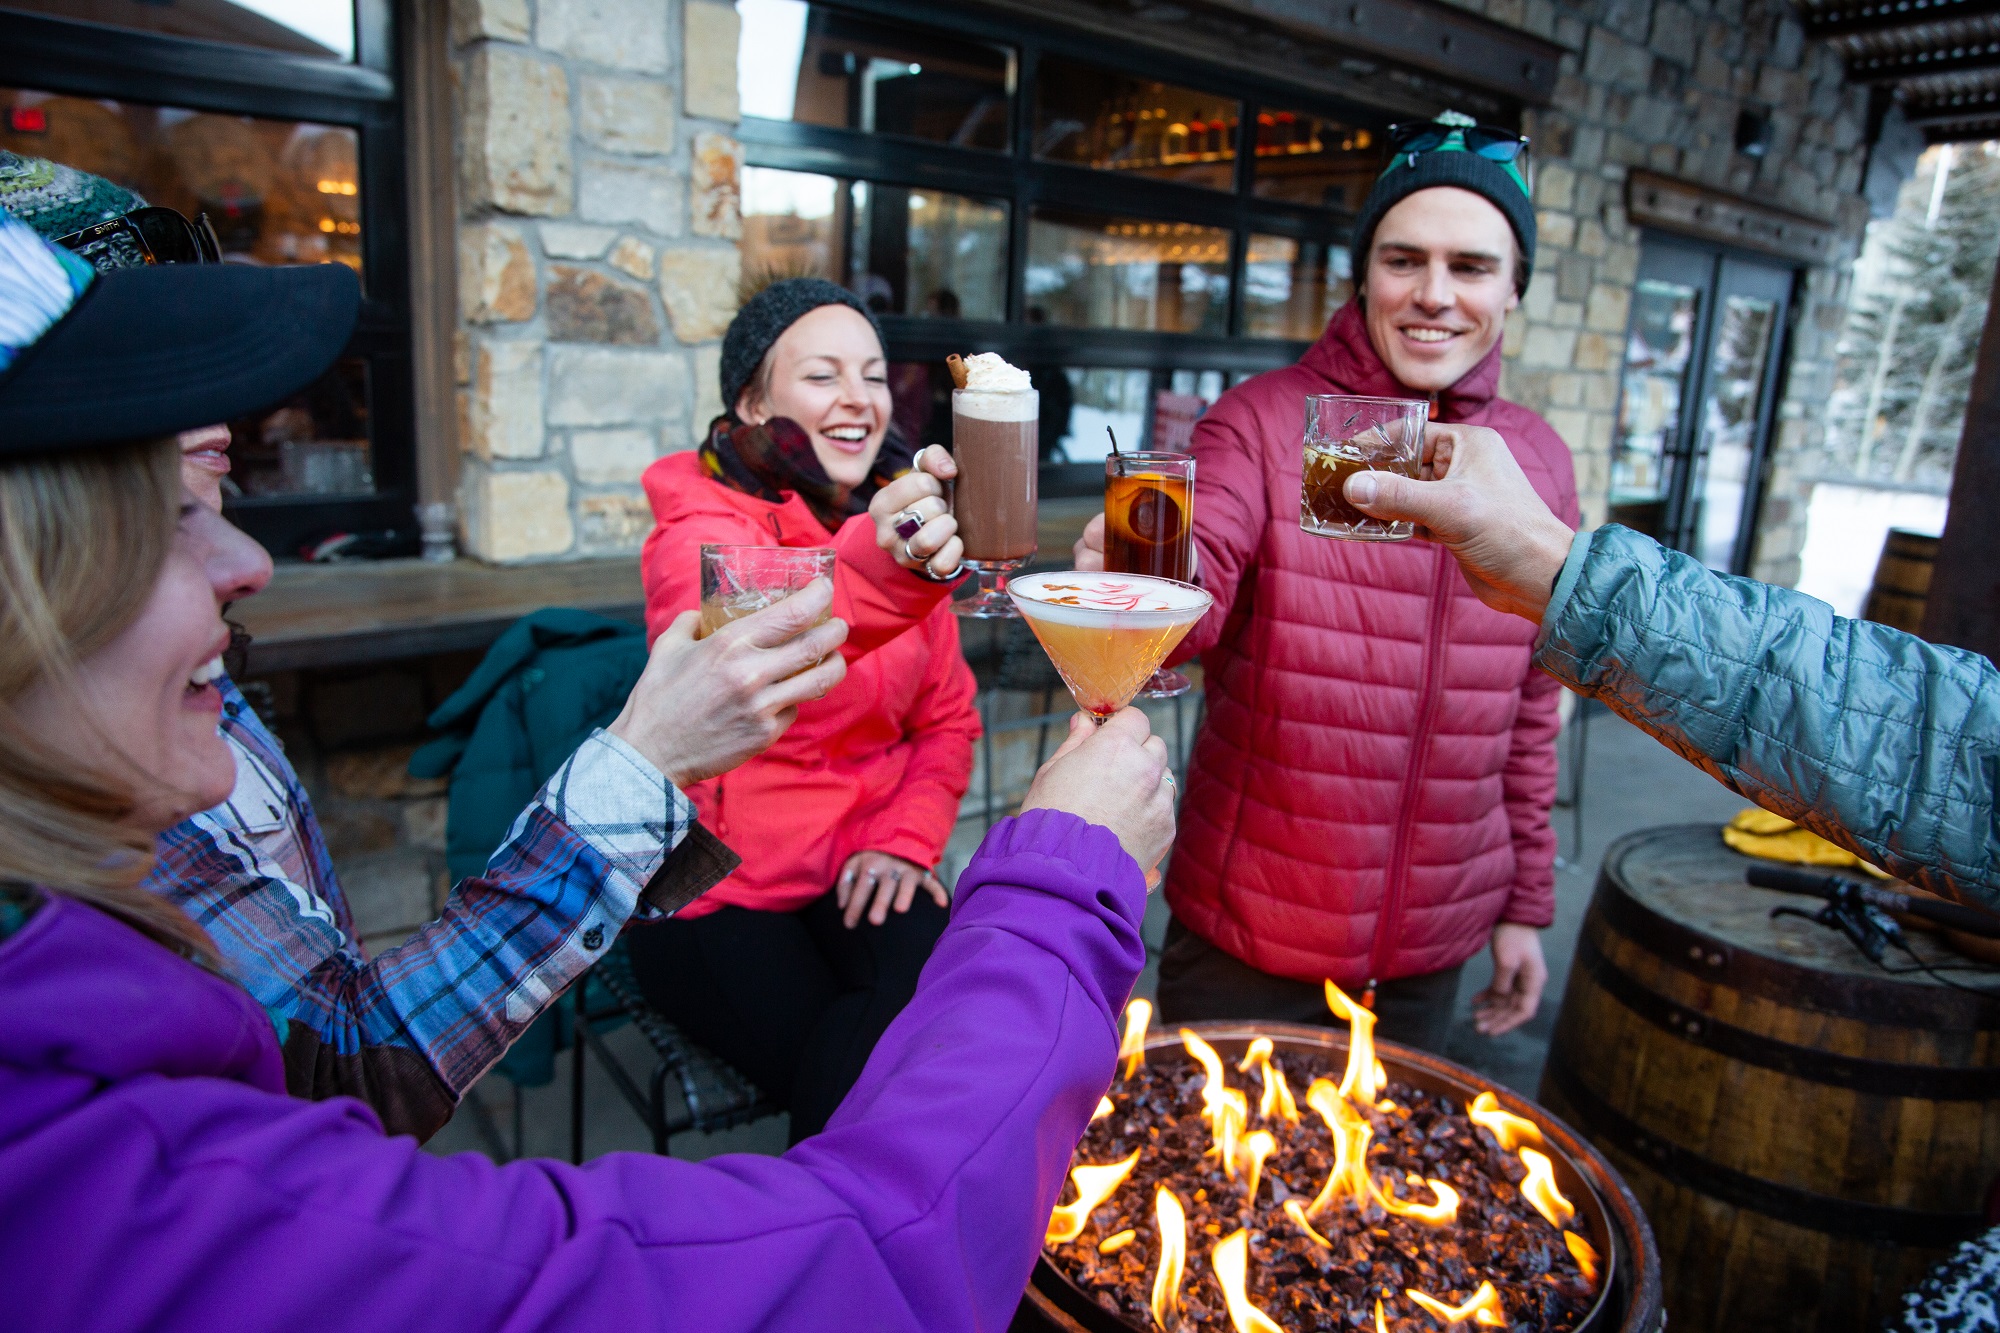 Group lifts cocktails up in celebration around an outdoor firepit.